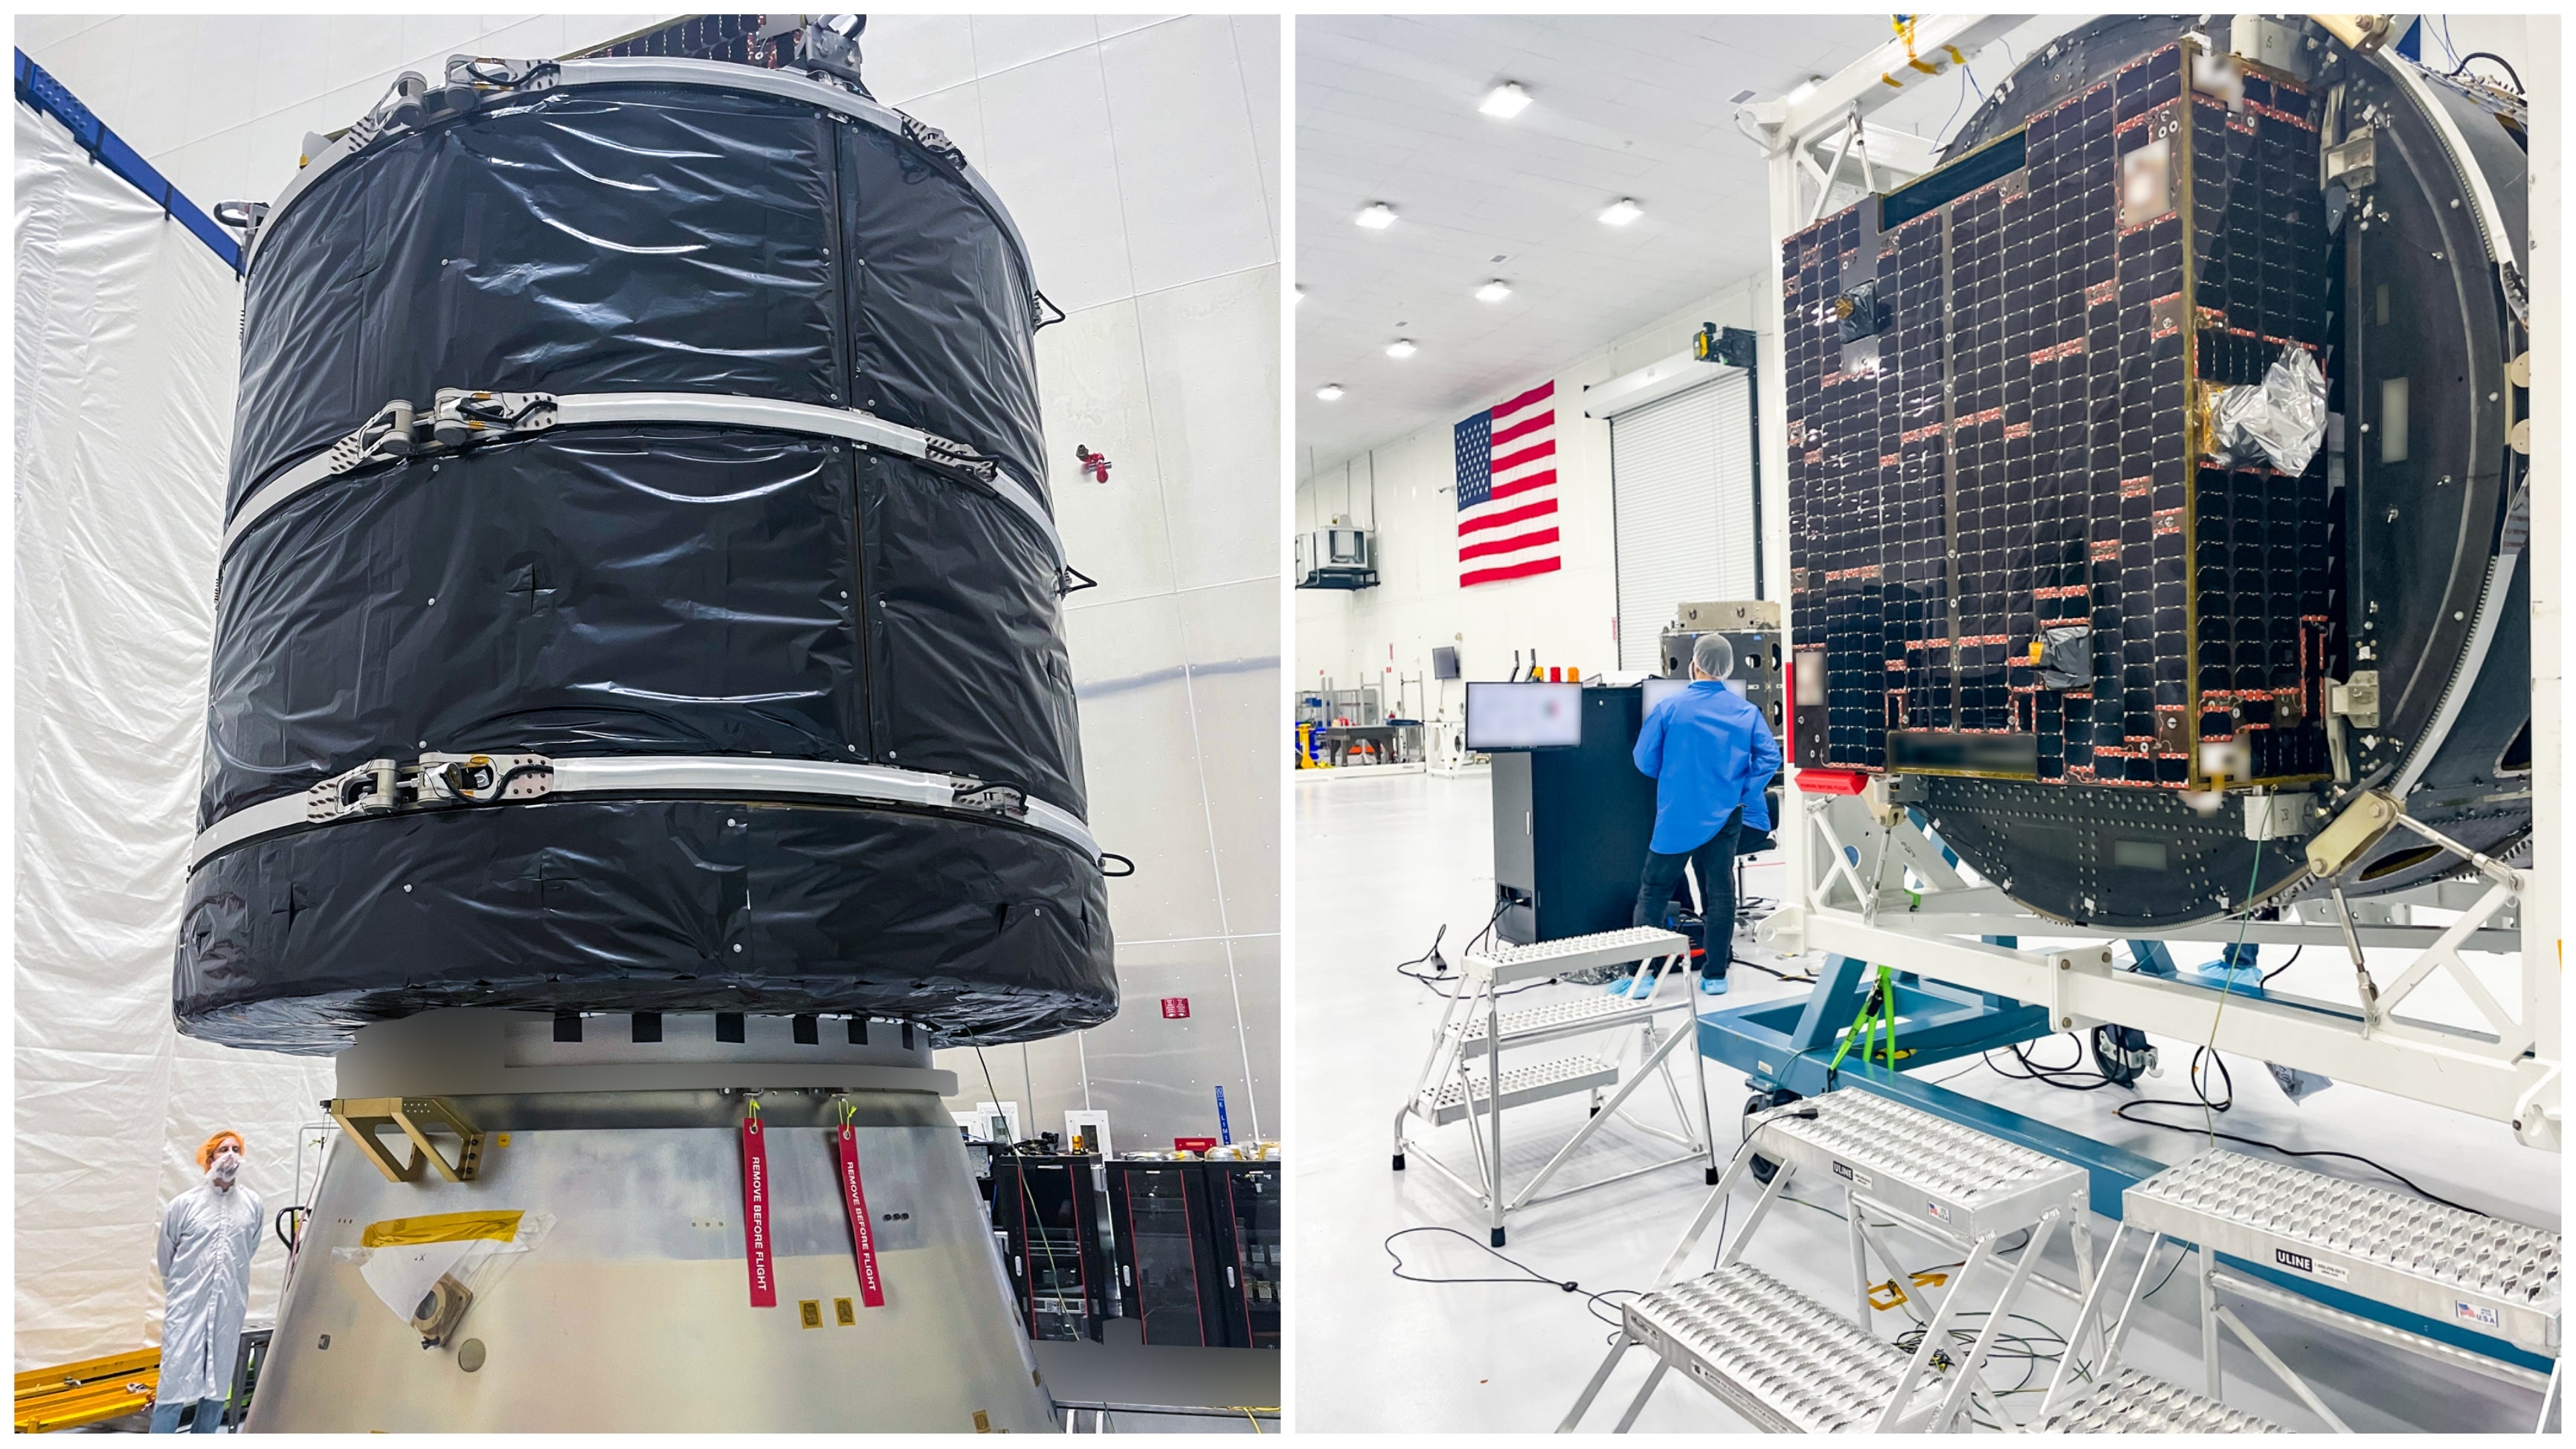 AST SpaceMobile's first cellular broadband network satellite will launch atop SpaceX's Falcon 9